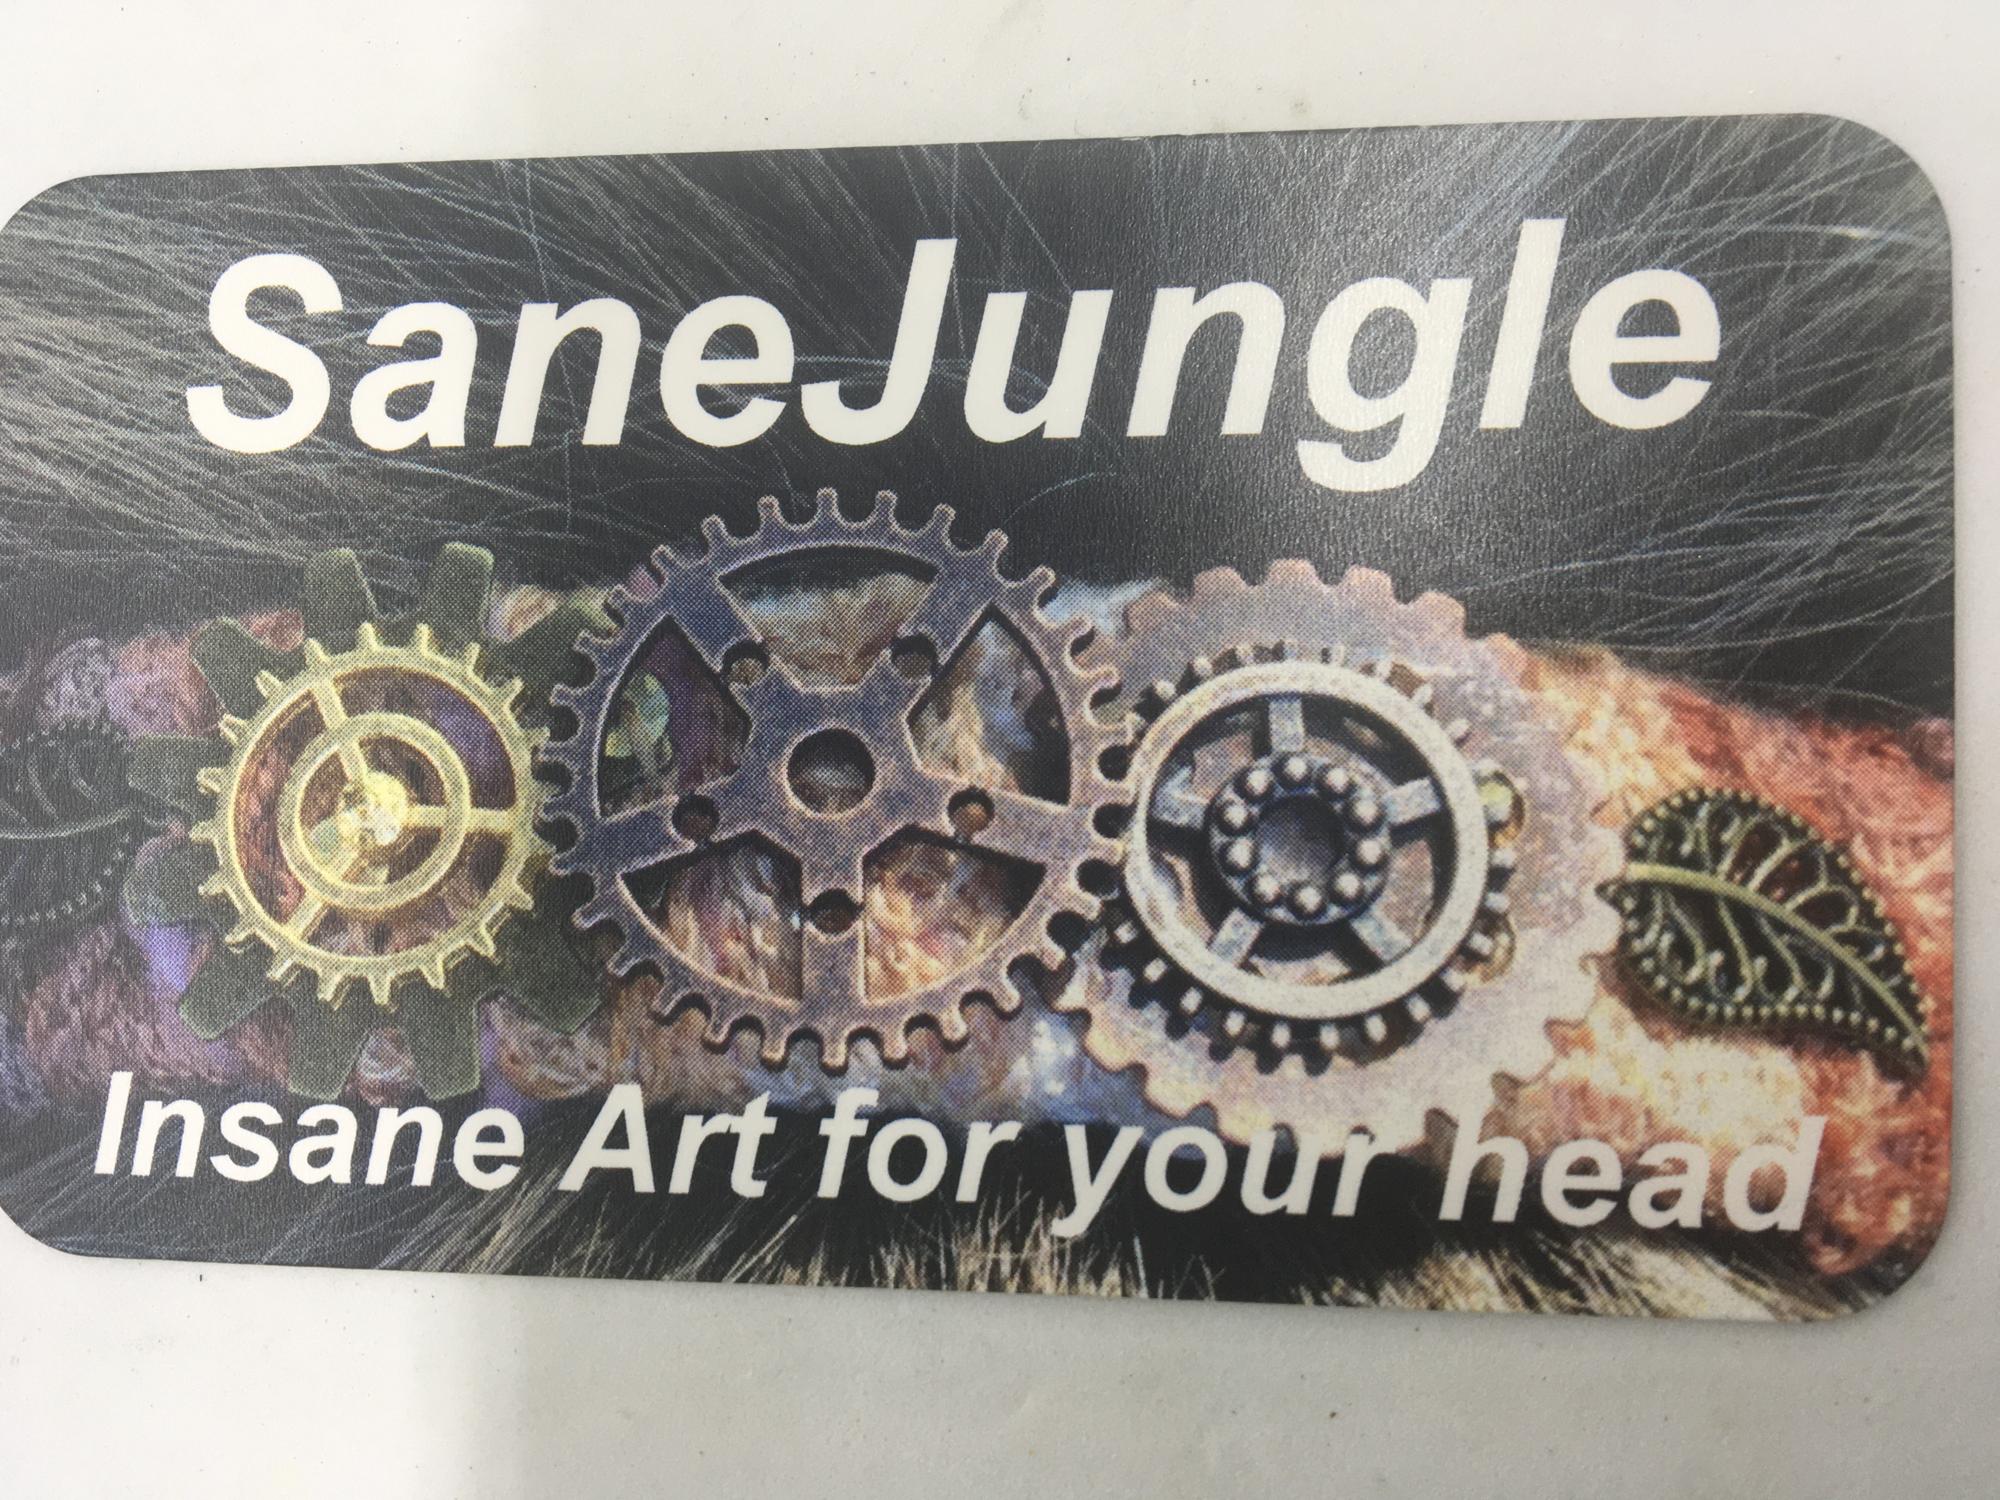 The words "SaneJungle - Insane Art for your head" over a picture of gears